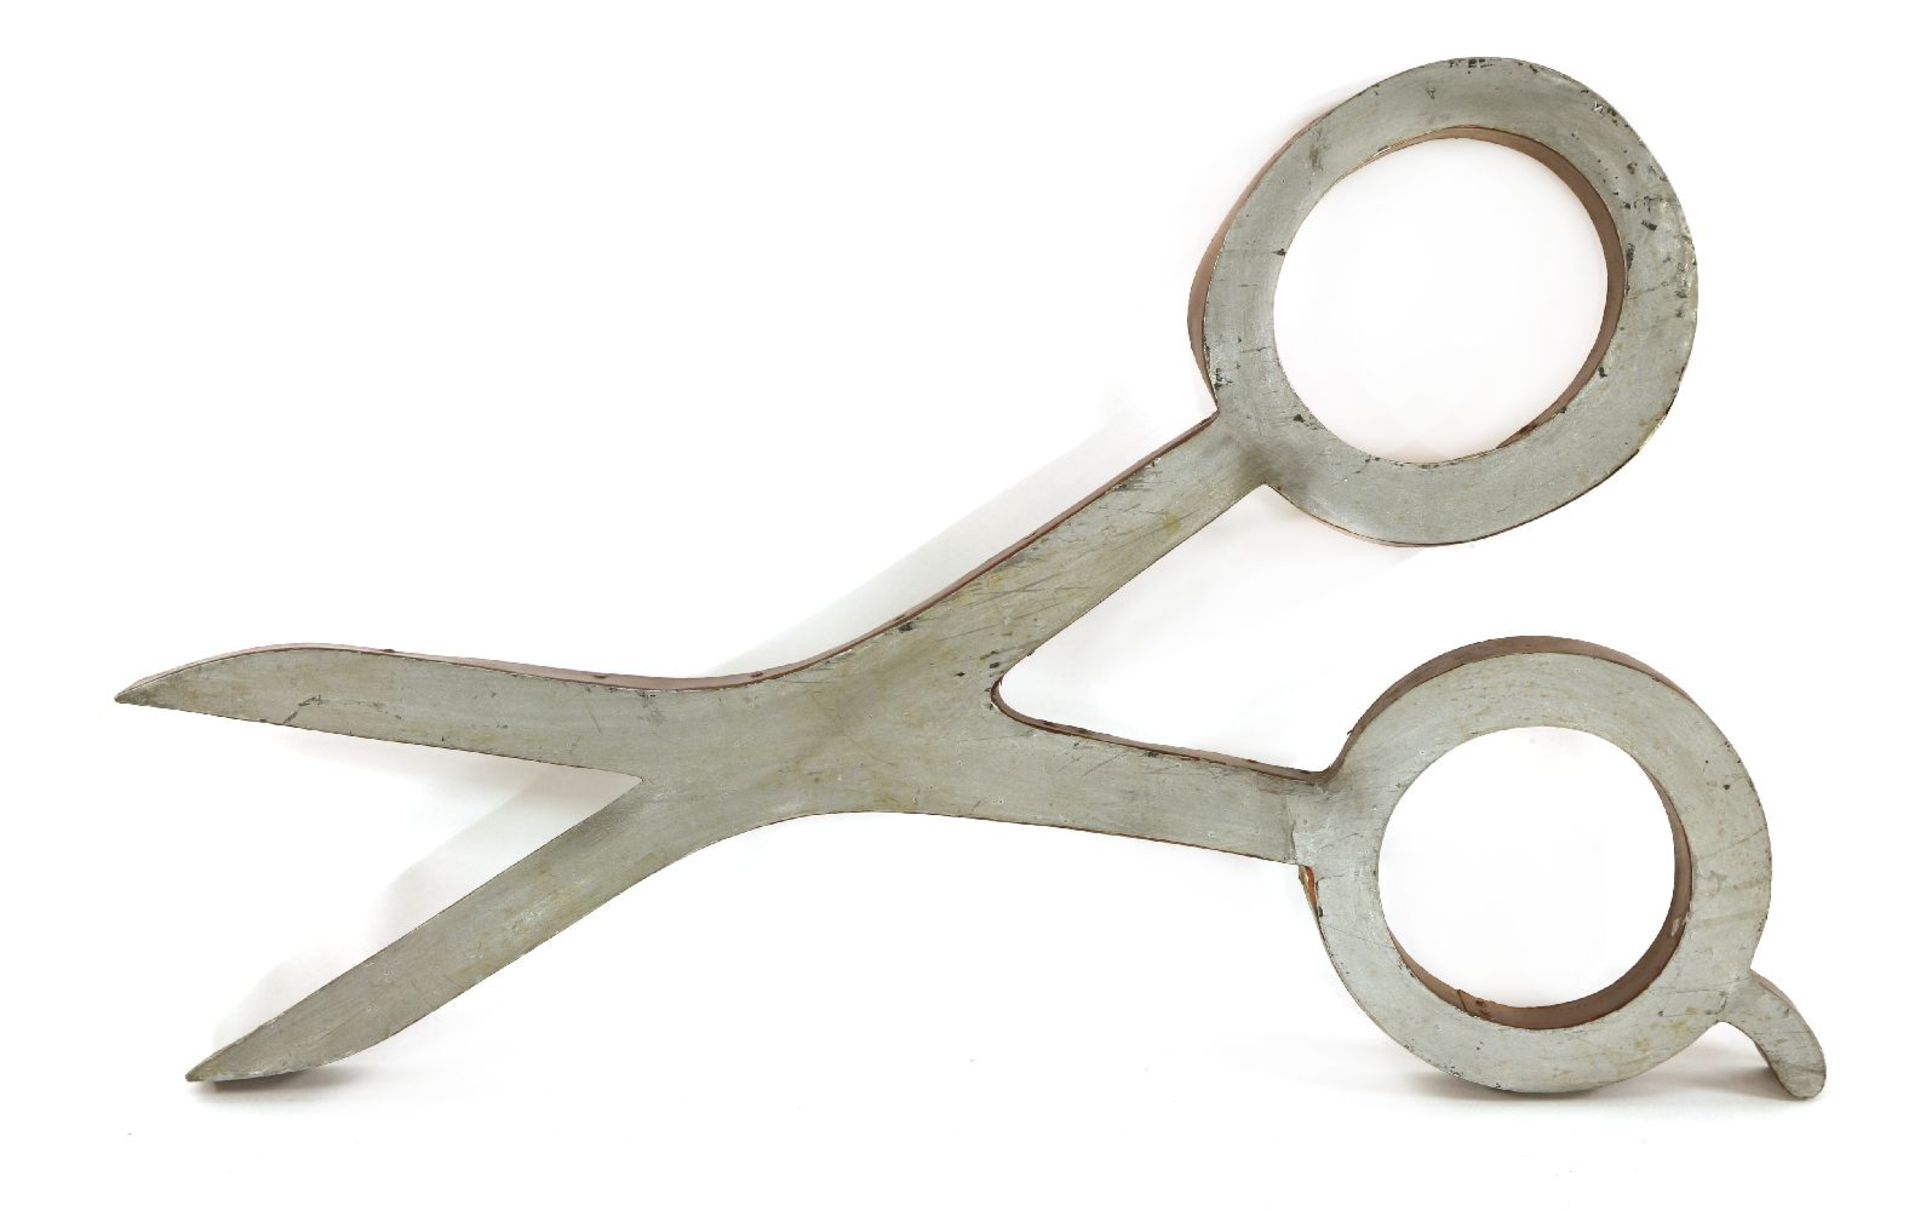 LARGE FRENCH SCISSORS SHOP SIGNmid-20th century, wooden, with grey and silver paint and some remains